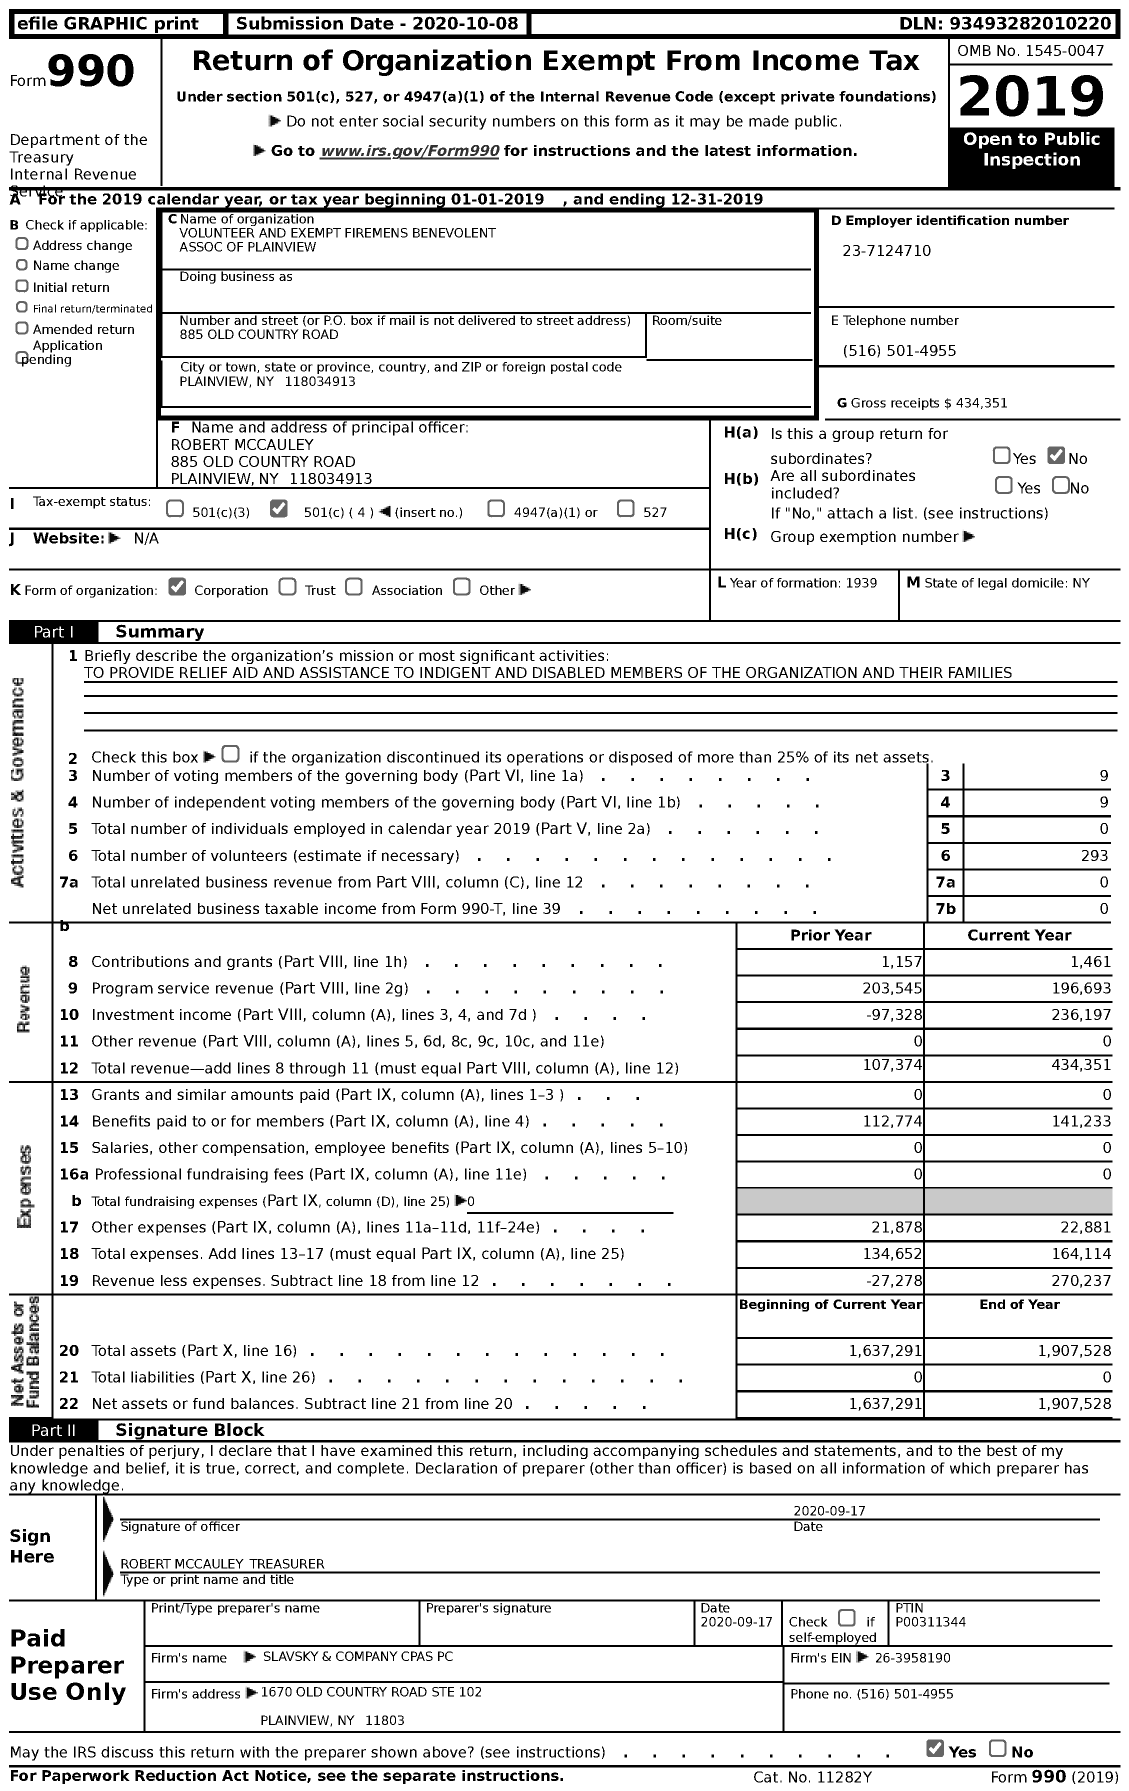 Image of first page of 2019 Form 990 for Volunteer and Exempt Firemens Benevolent Association of Plainview